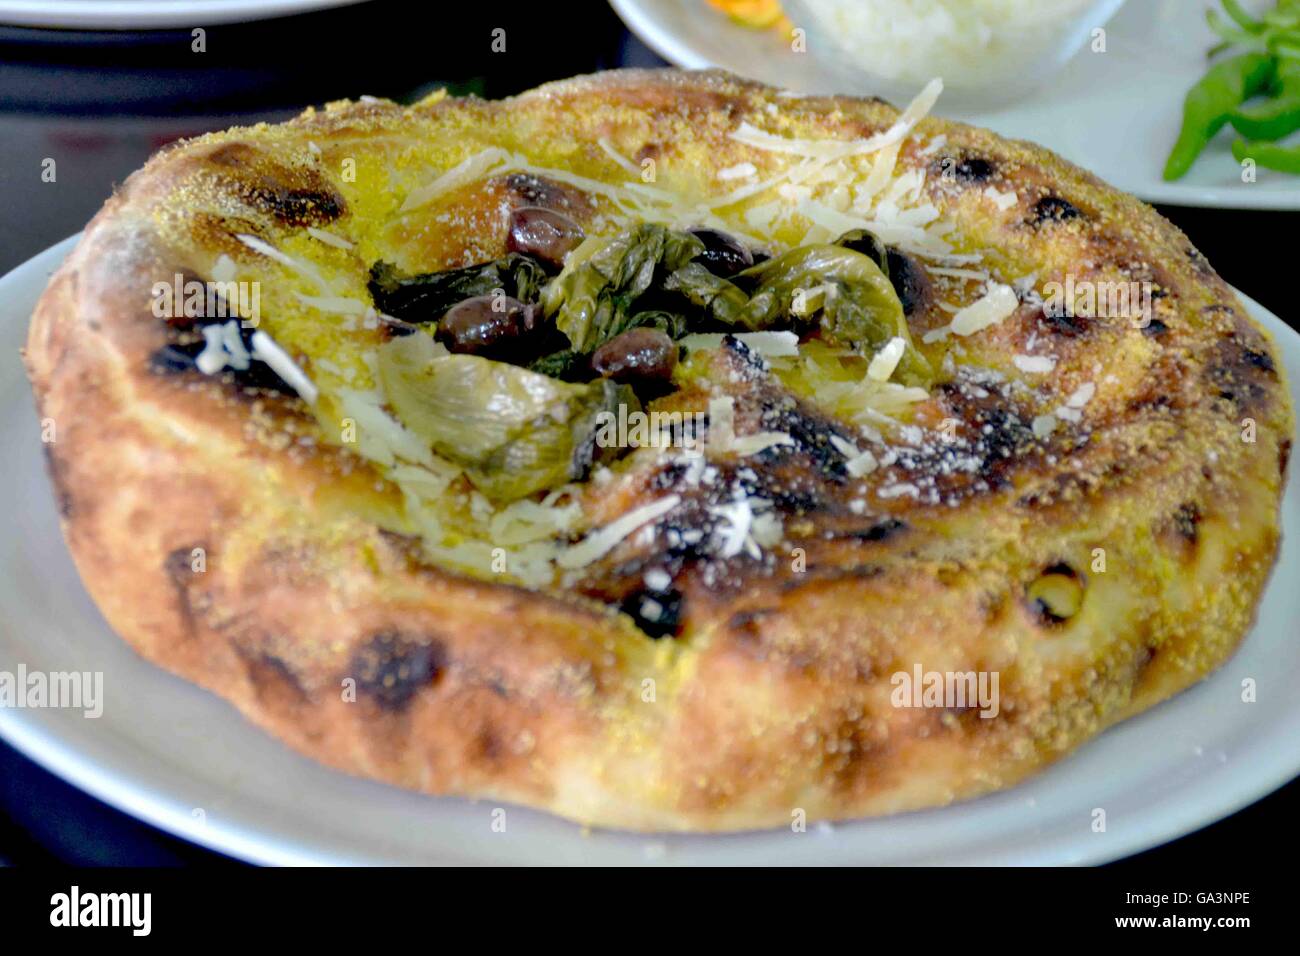 Torre Del Greco, Italy. 02nd July, 2016. This is a stuffed pizza with escarole, pine nuts and olives. Pizza is one of the most famous Italian dishes. It finds its best expression in Naples. © Maria Consiglia Izzo/Pacific Press/Alamy Live News Stock Photo